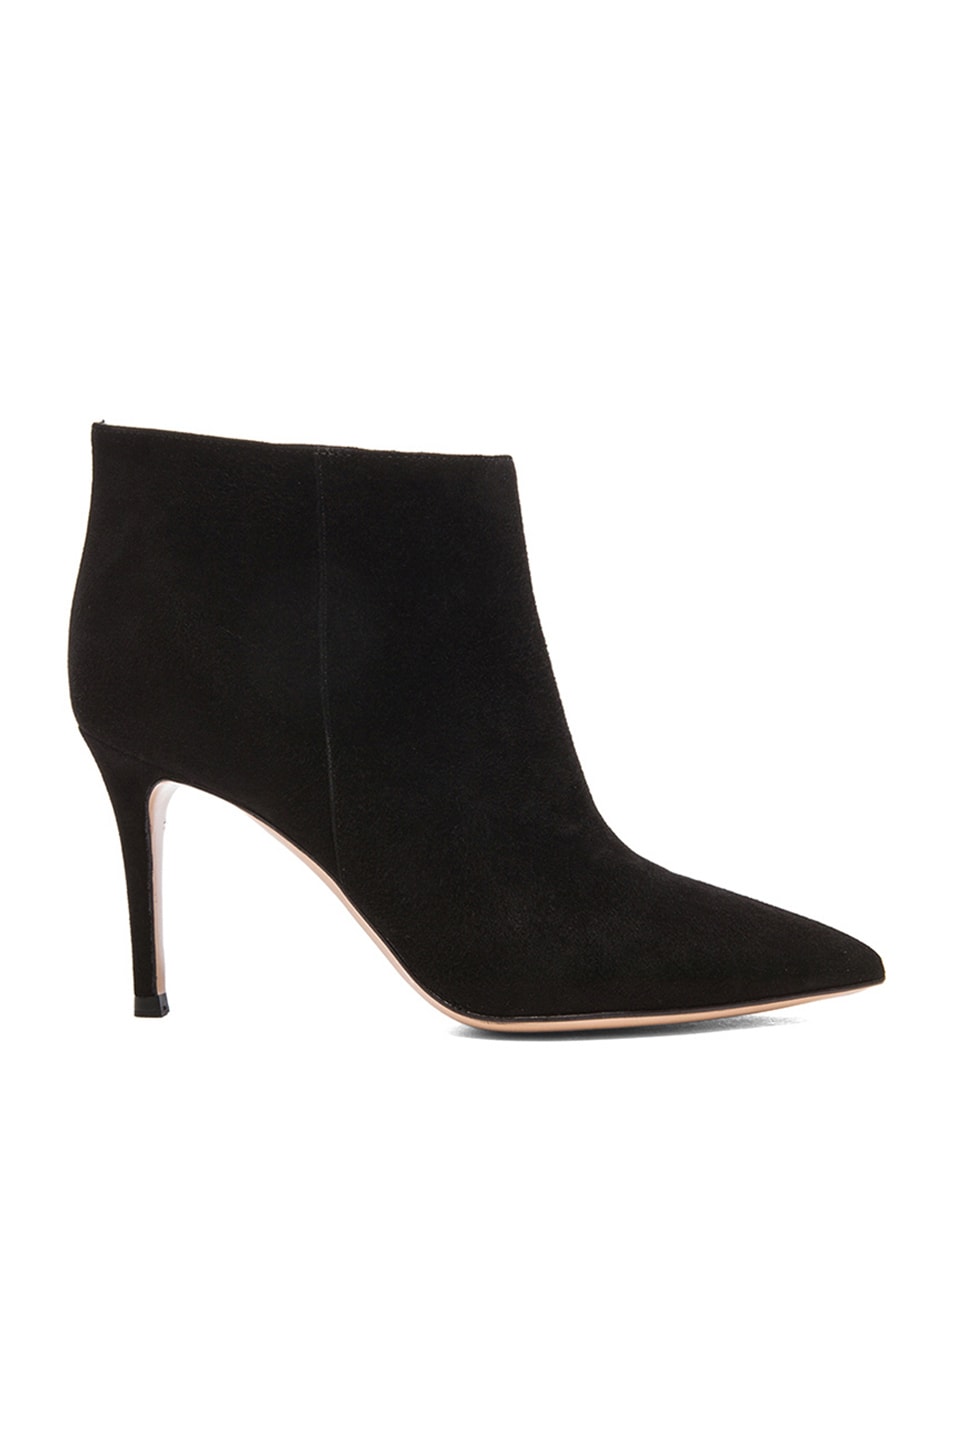 Image 1 of Gianvito Rossi Pointed Suede Ankle Booties in Black